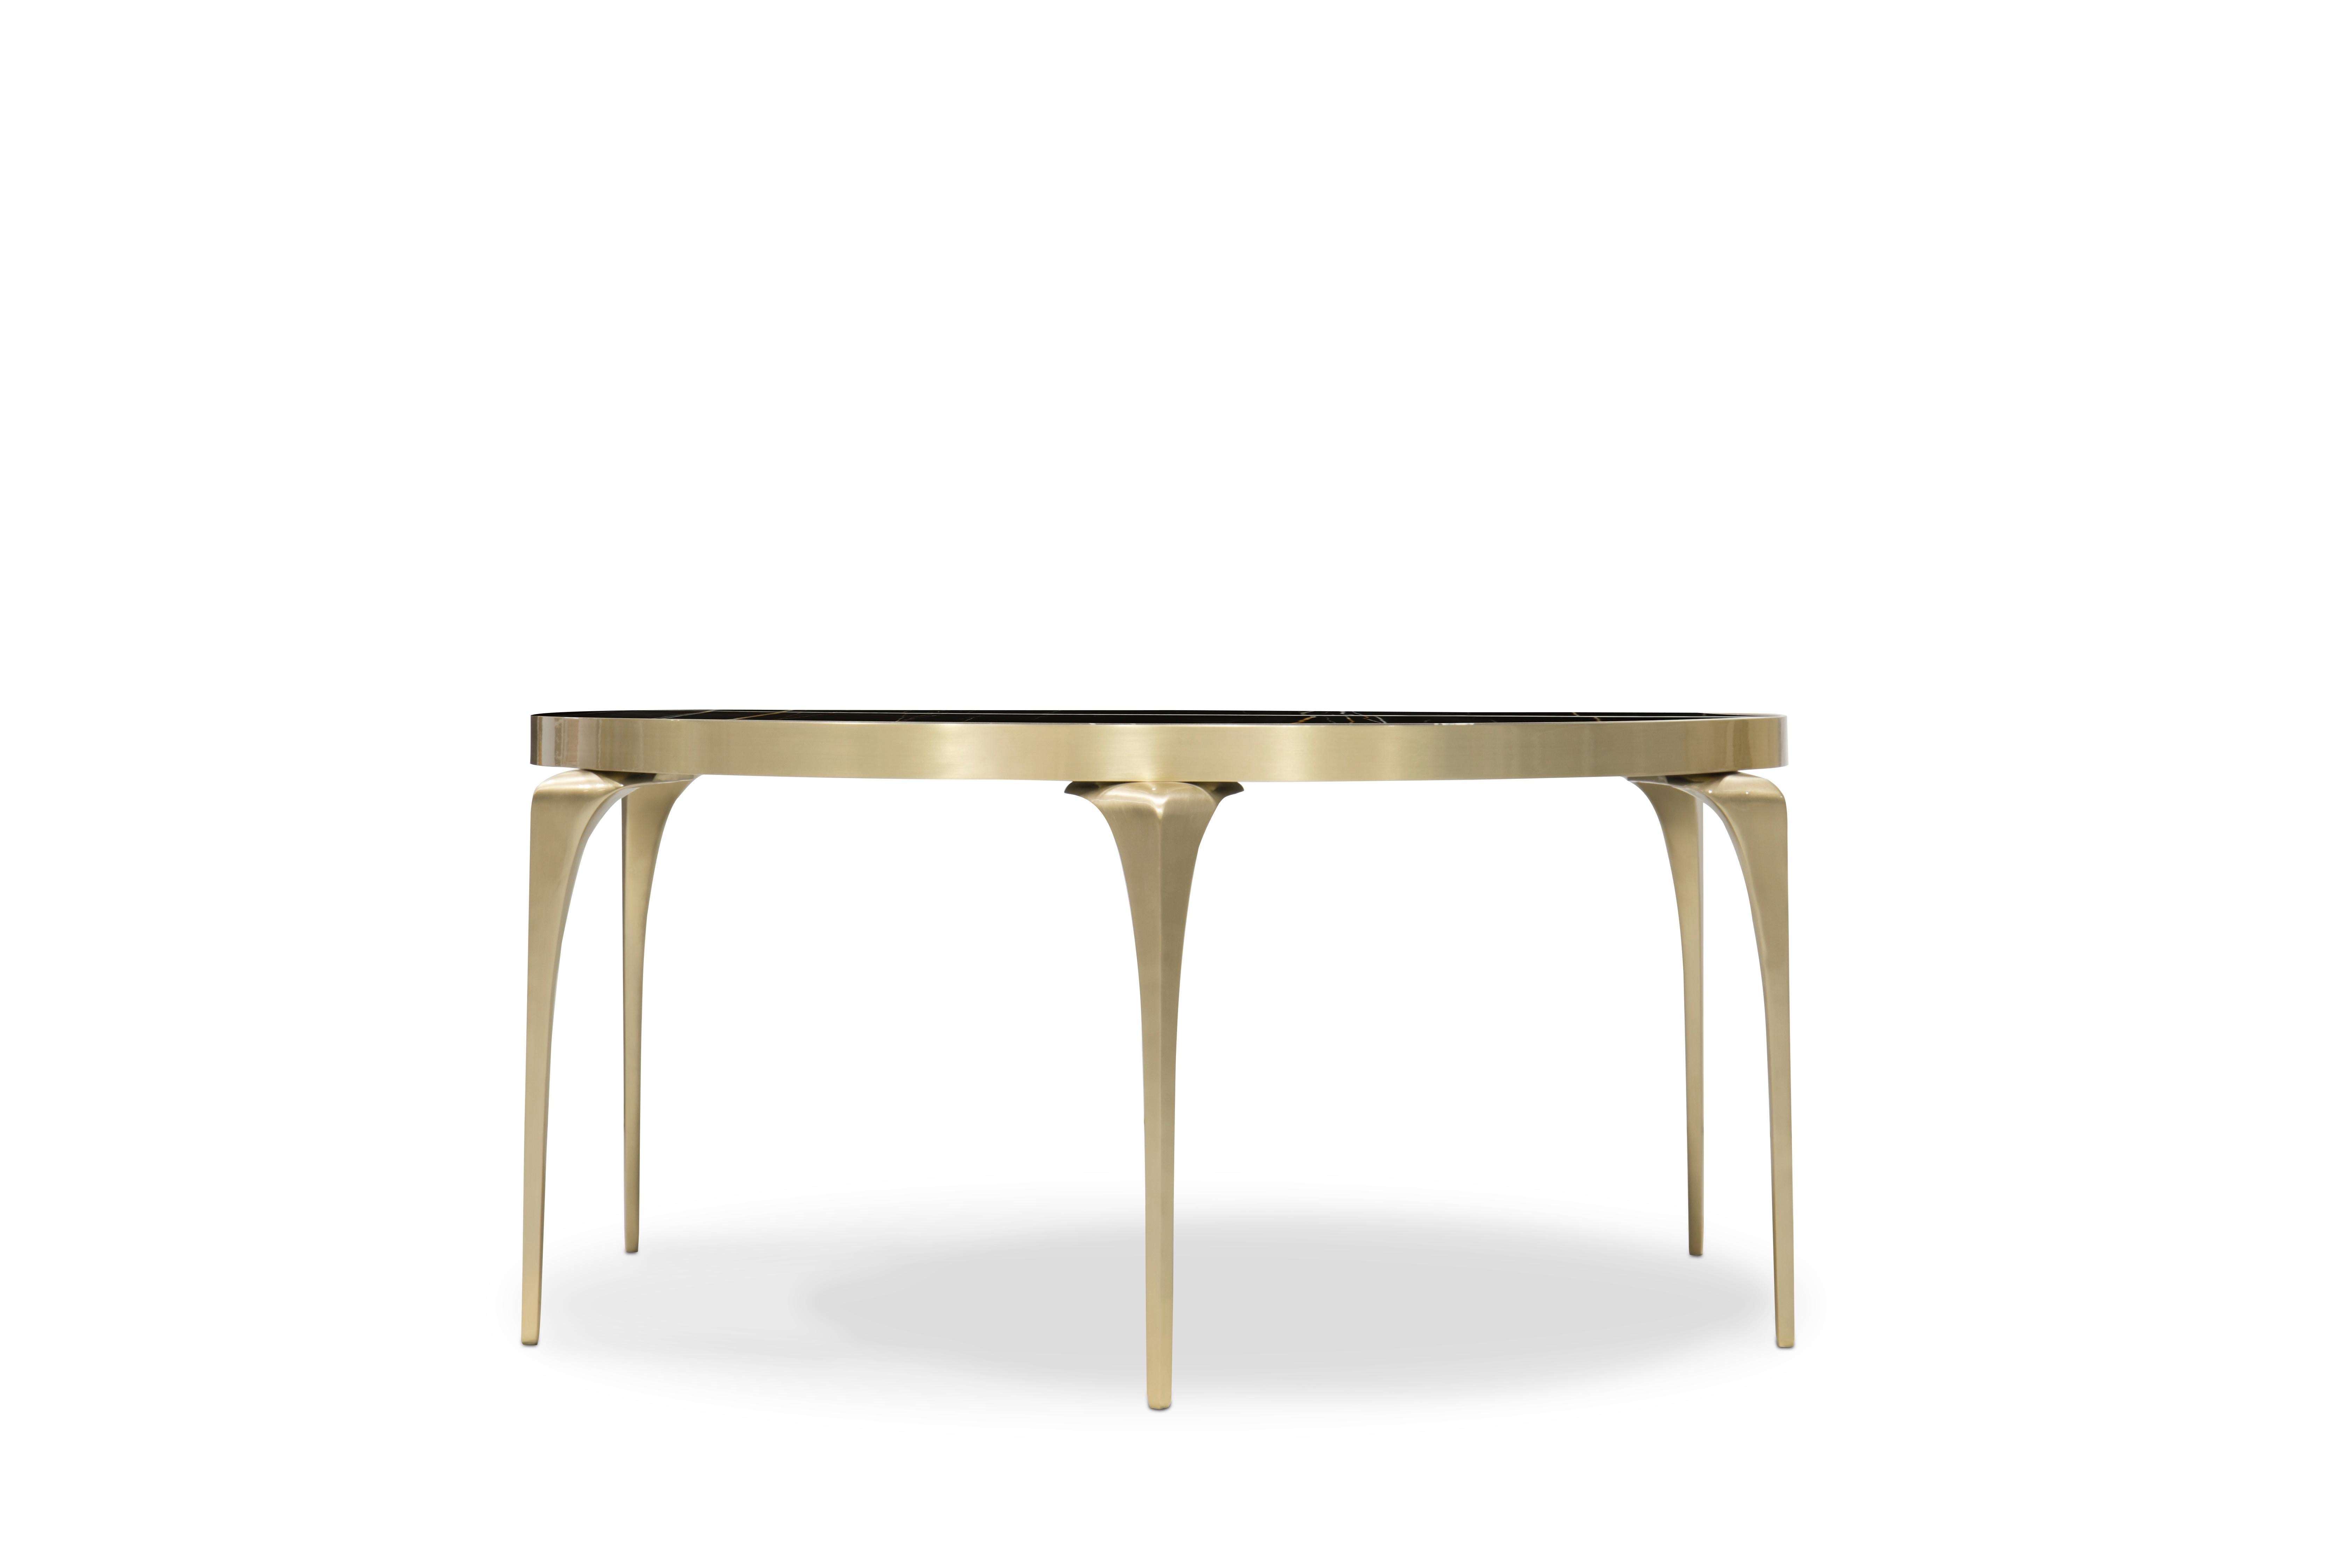 With its lux, polished black Sahara Noir marble top and satin brass legs the Rita cocktail table embodies sophisticated chic style. Simple yet modish, Rita is sure to bring a refined elegance to any room.

Base: Satin brass with high gloss finish